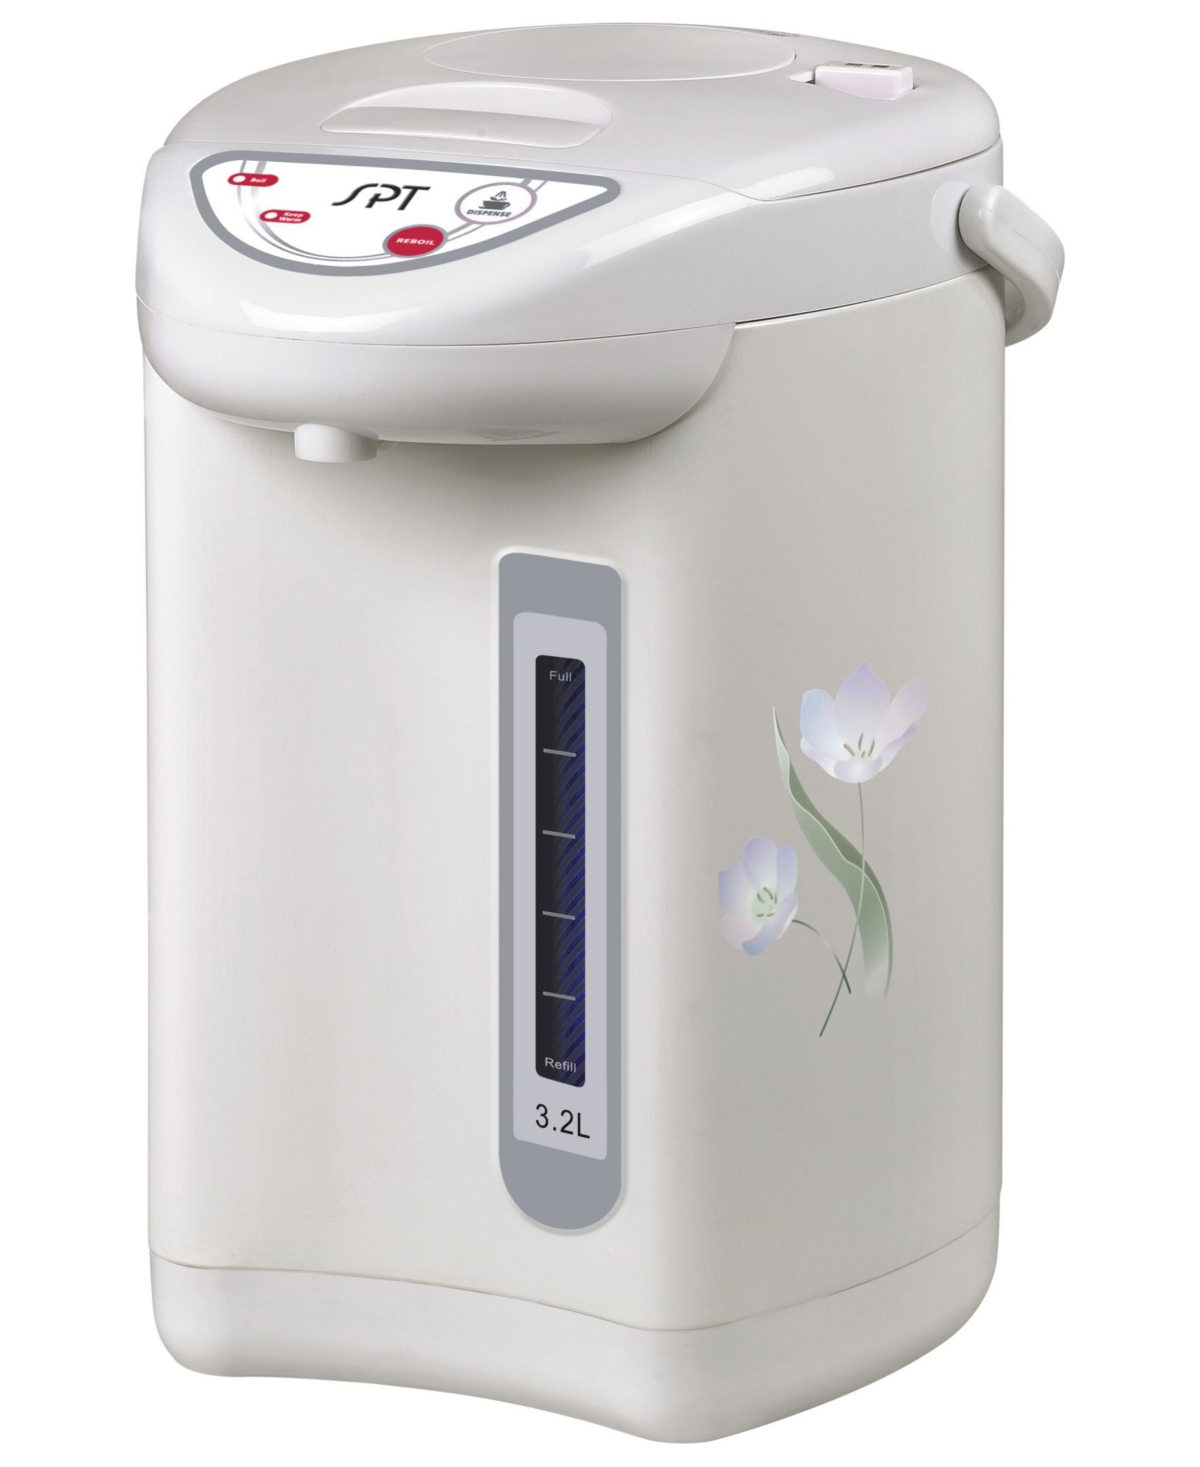 Spt 3.2L Hot Water Dispenser with Dual-Pump System - White